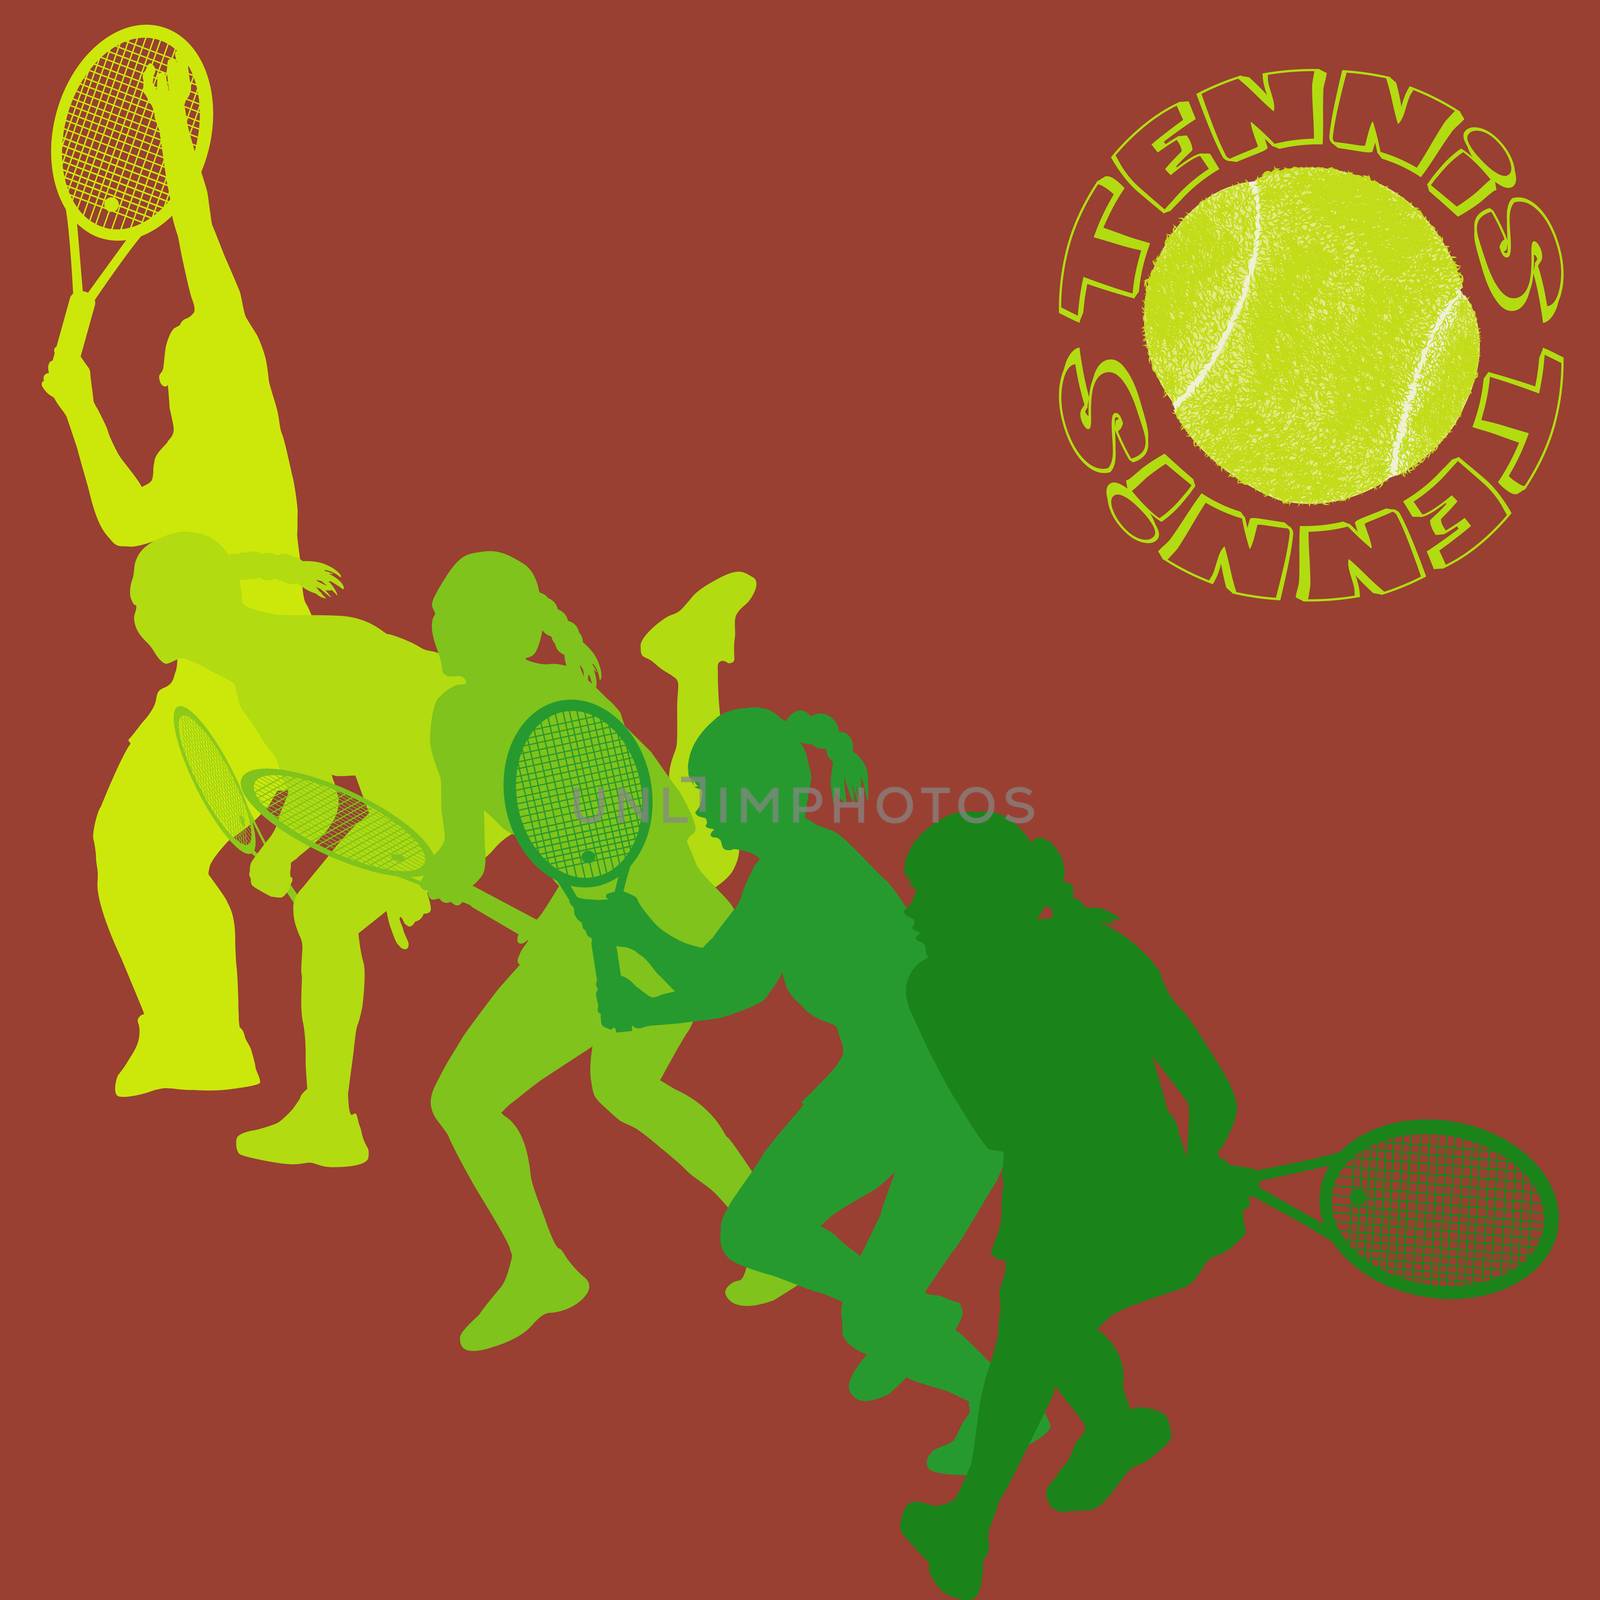 Woman tennis player silhouettes